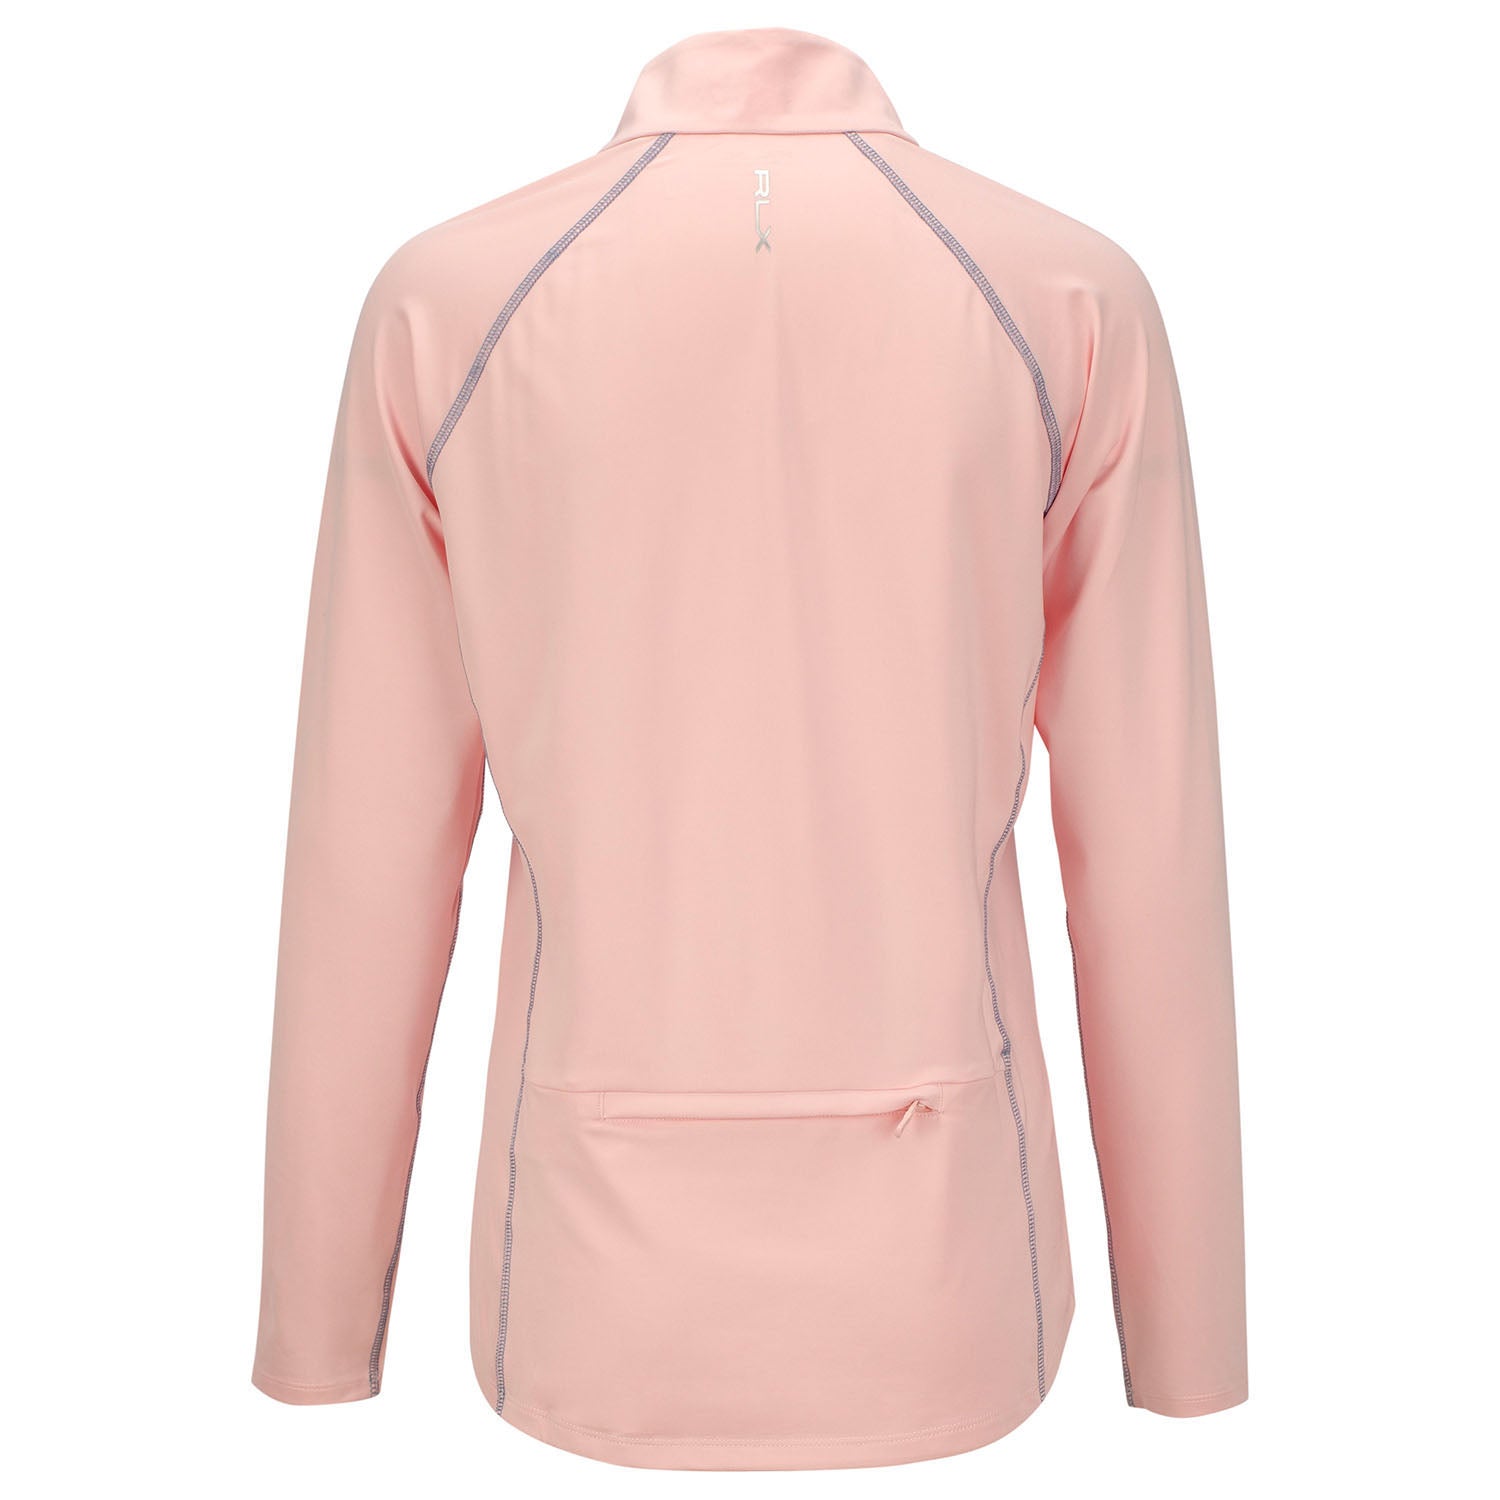 Ralph Lauren 2023 PGA Championship Long Sleeve Lightweight Airflow Jersey Pullover in Pink Sand- Front View